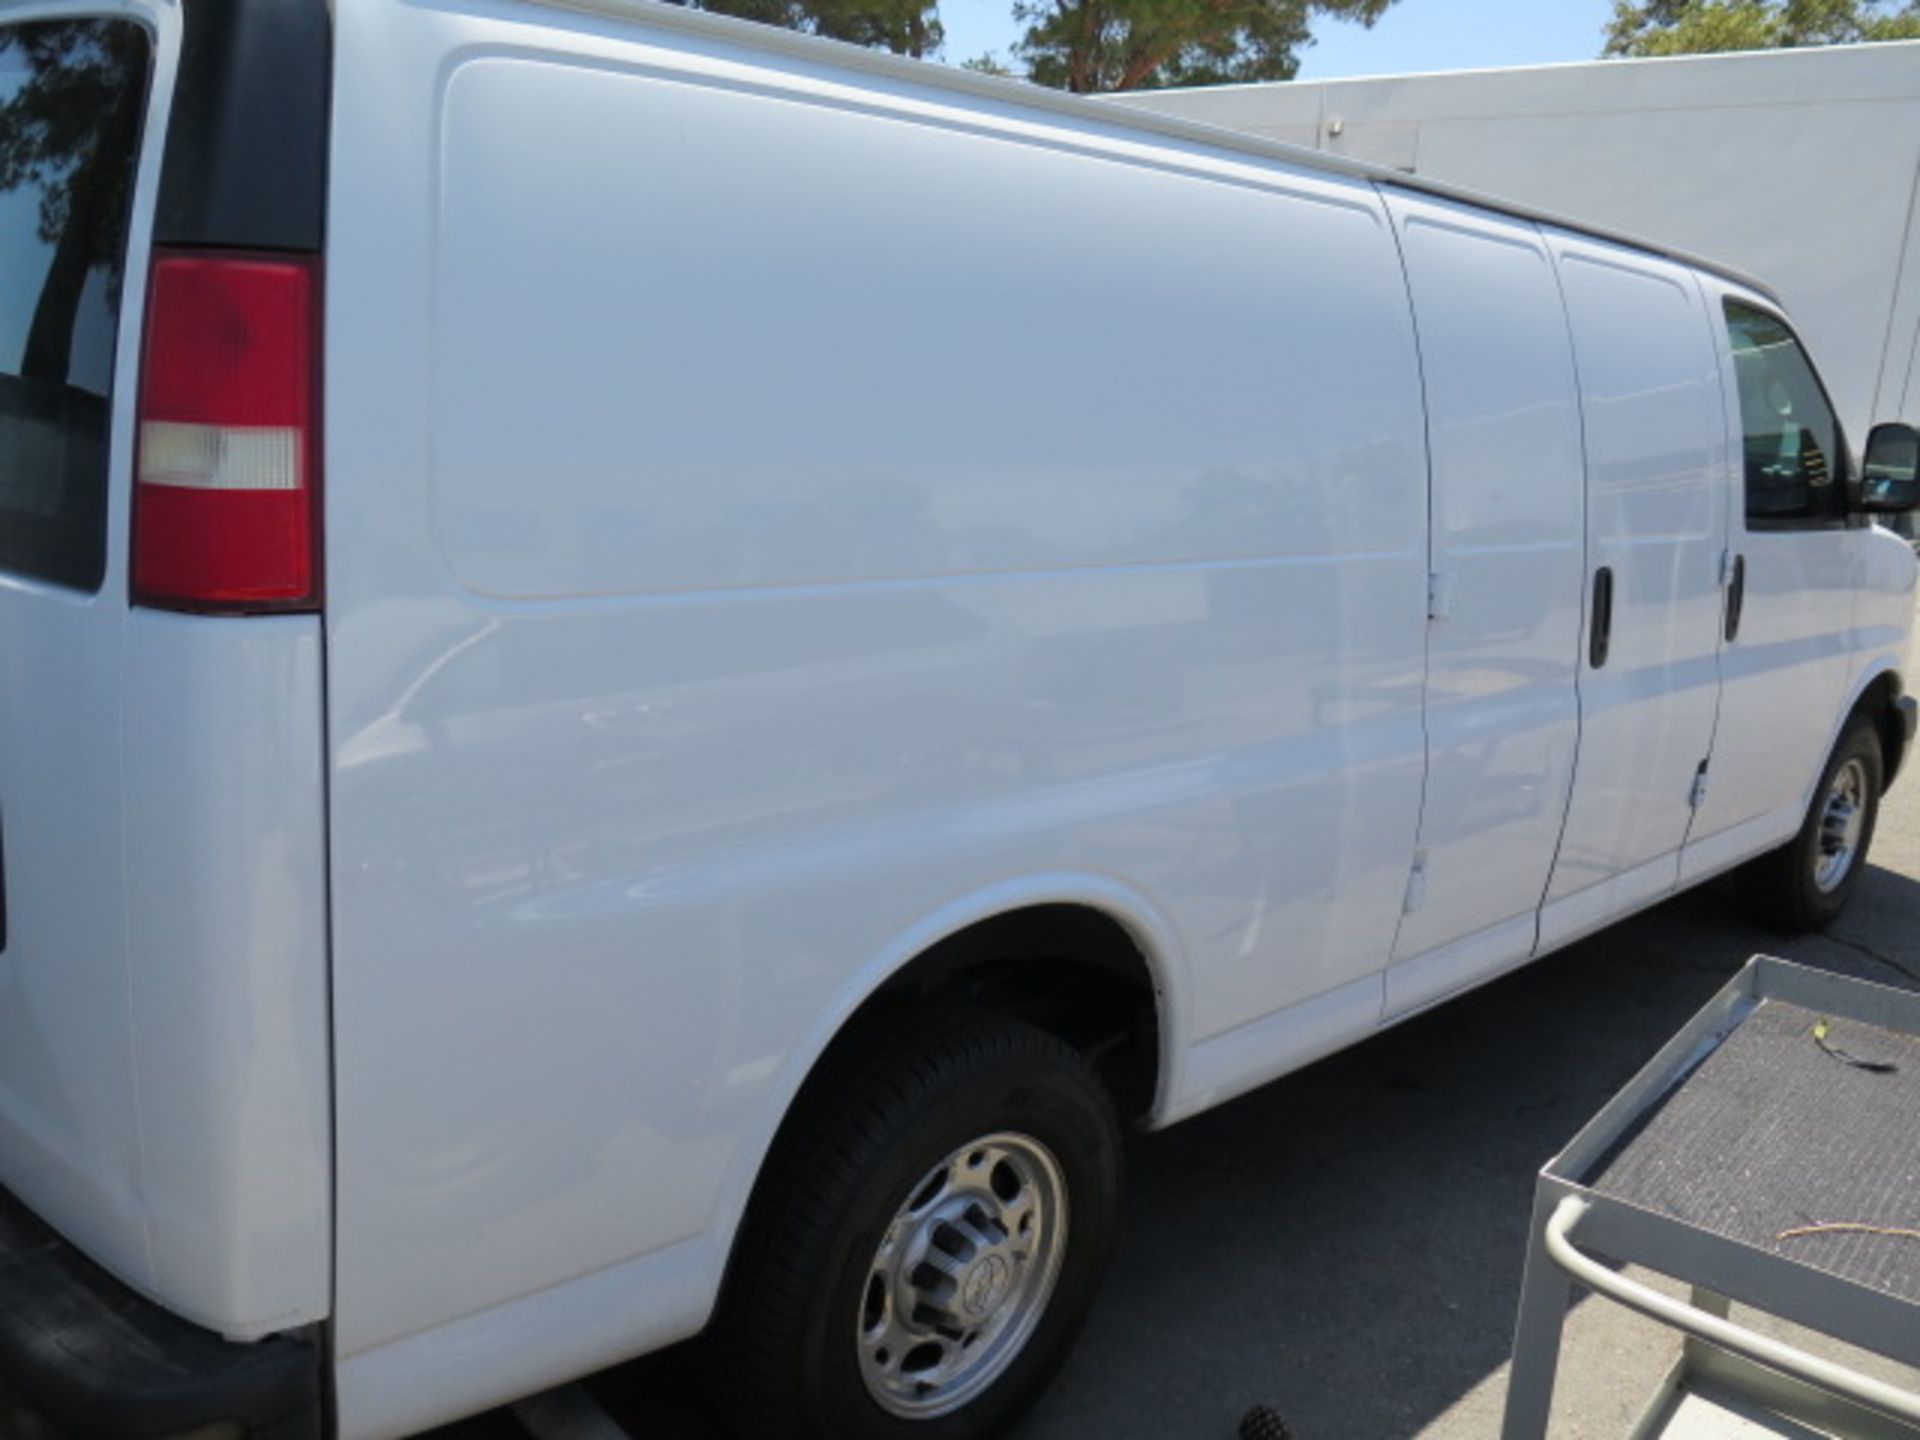 2014 Chevrolet Express Cargo Van Lisc# 09169S1 w/ Vortec V8 Gas Engine, Automatic Trans, SOLD AS IS - Image 4 of 23